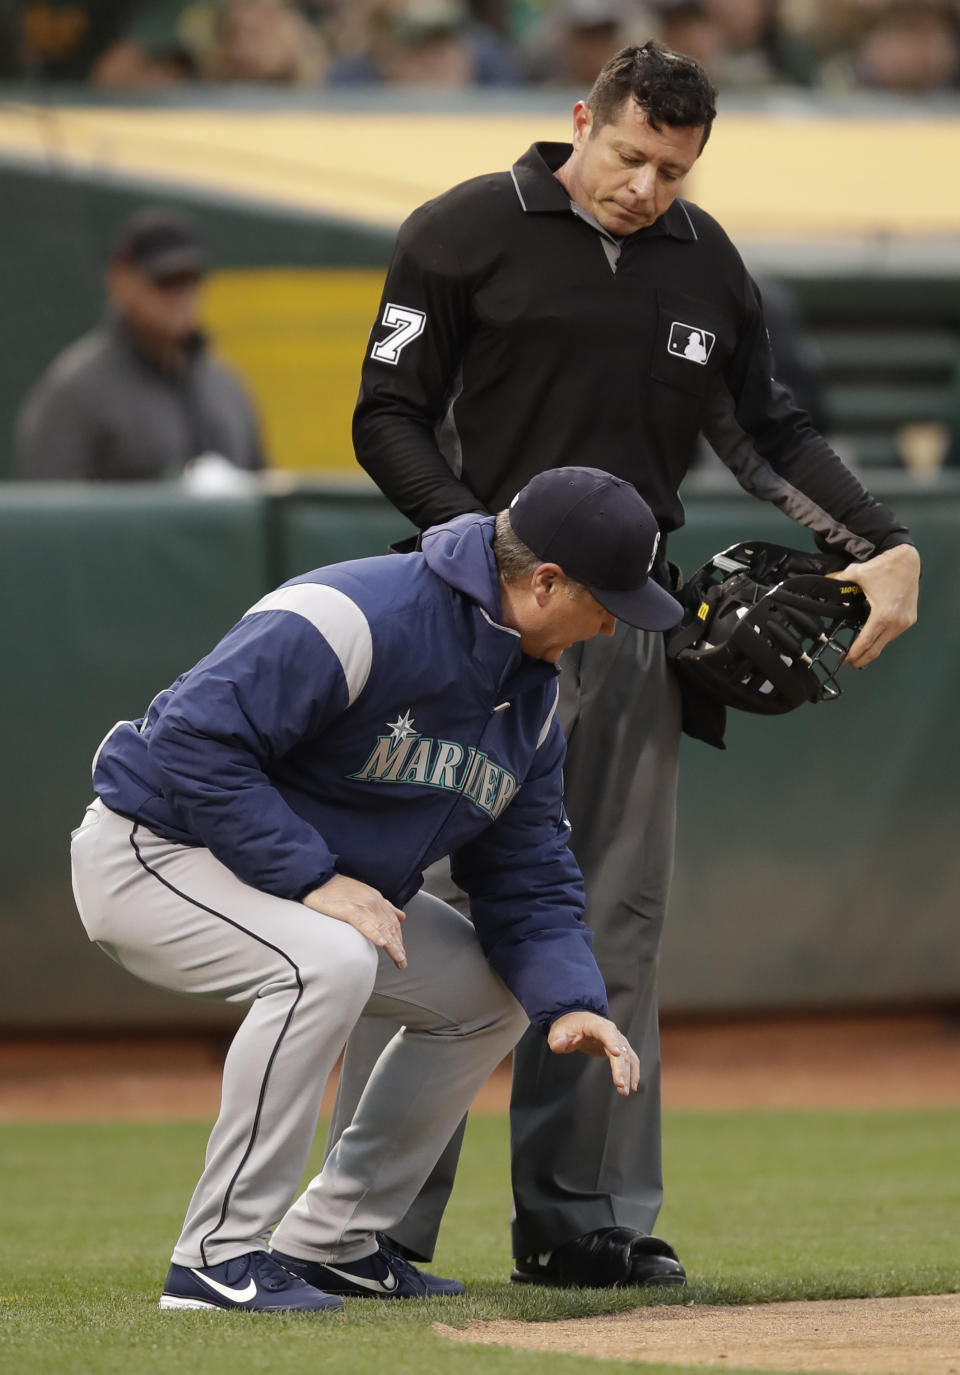 Seattle Mariners manager Scott Servais, left, squats at home plate as he speaks with umpire Carlos Torres in the fourth inning of a baseball game against the Oakland Athletics, Saturday, June 15, 2019, in Oakland, Calif. Servais was ejected from the game by Torres. (AP Photo/Ben Margot)